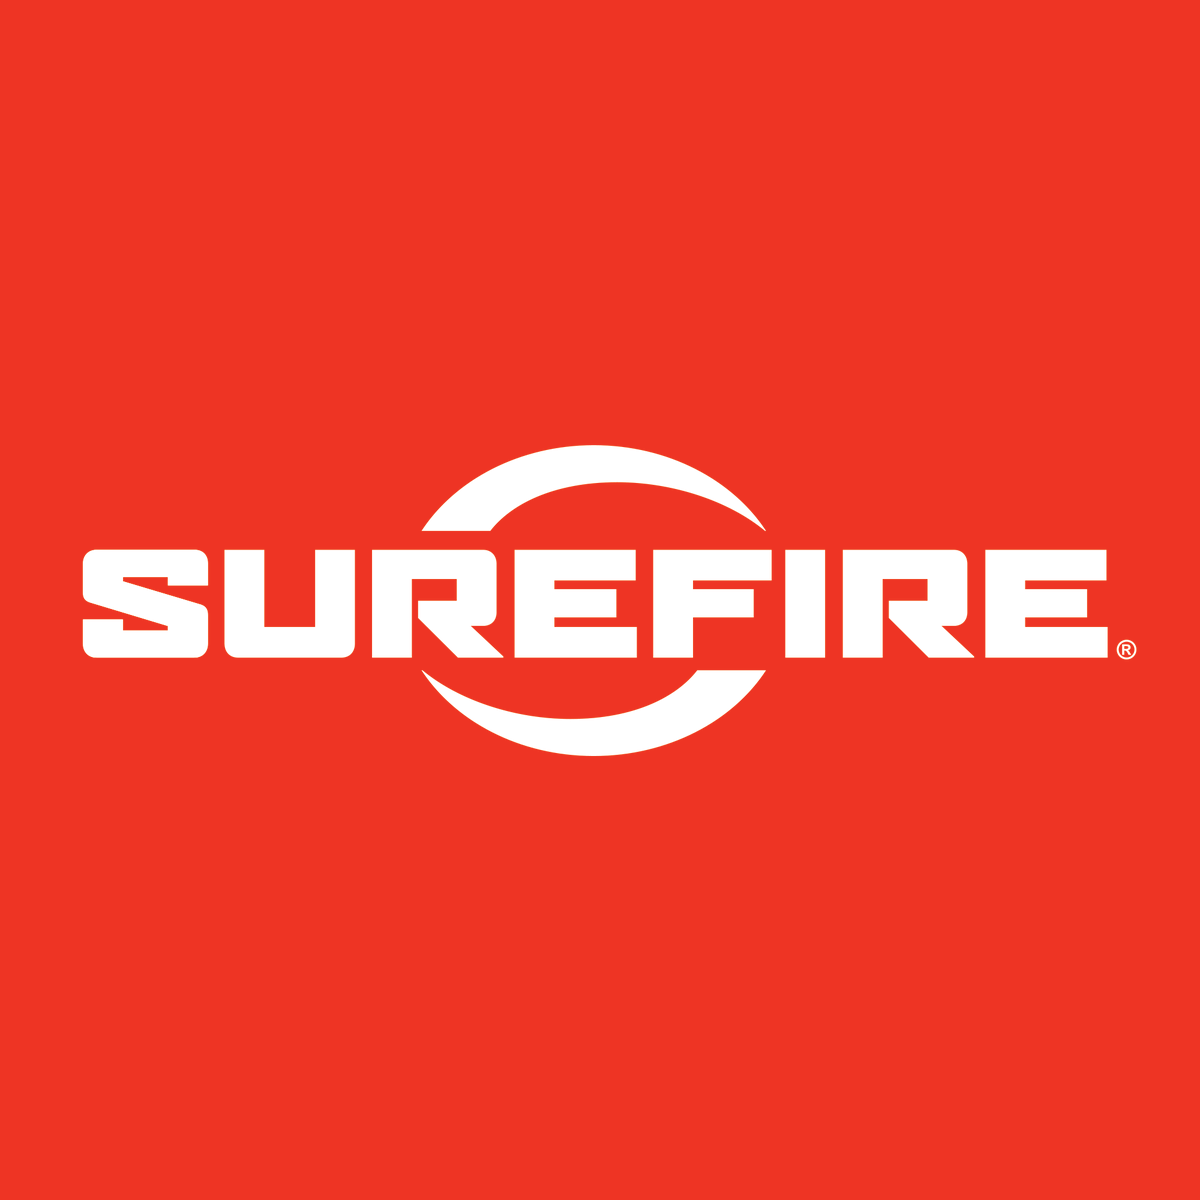 When it comes to tactical illumination, nothing comes close to SureFire. Backed by years of research and innovation, SureFire today offers the best in quality gear for military, law enforcement, outdoor adventure, and everyday carry. Get yours now! gearforthewild.com/surefire/